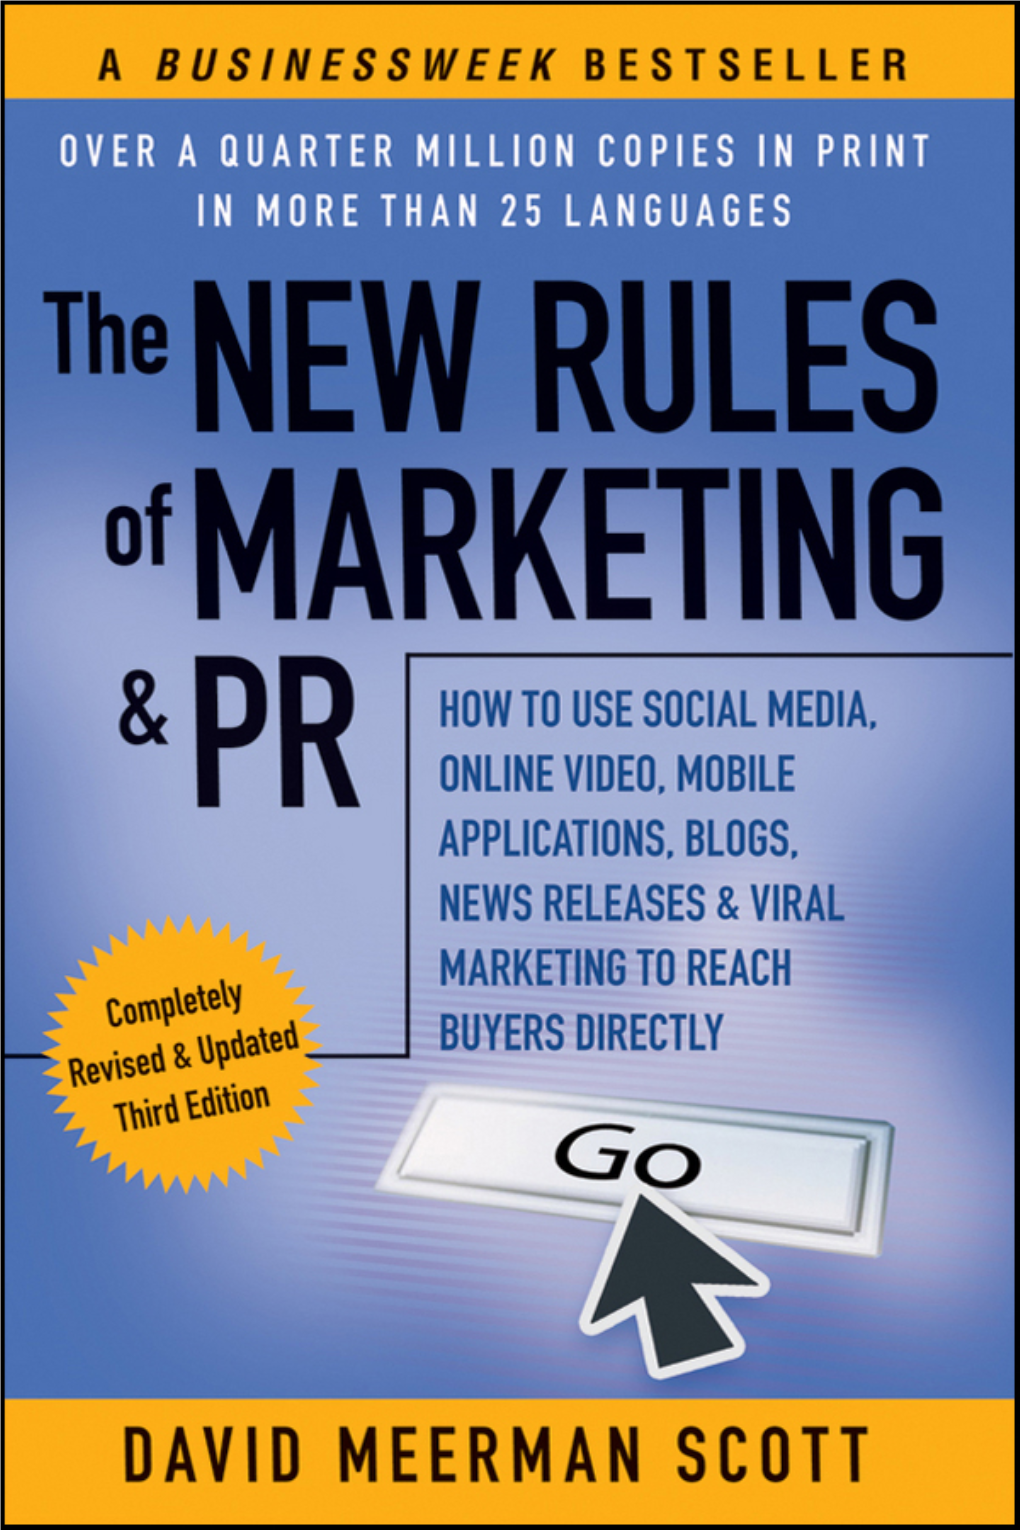 The NEW RULES of MARKETING & PR: HOW to USE SOCIAL MEDIA